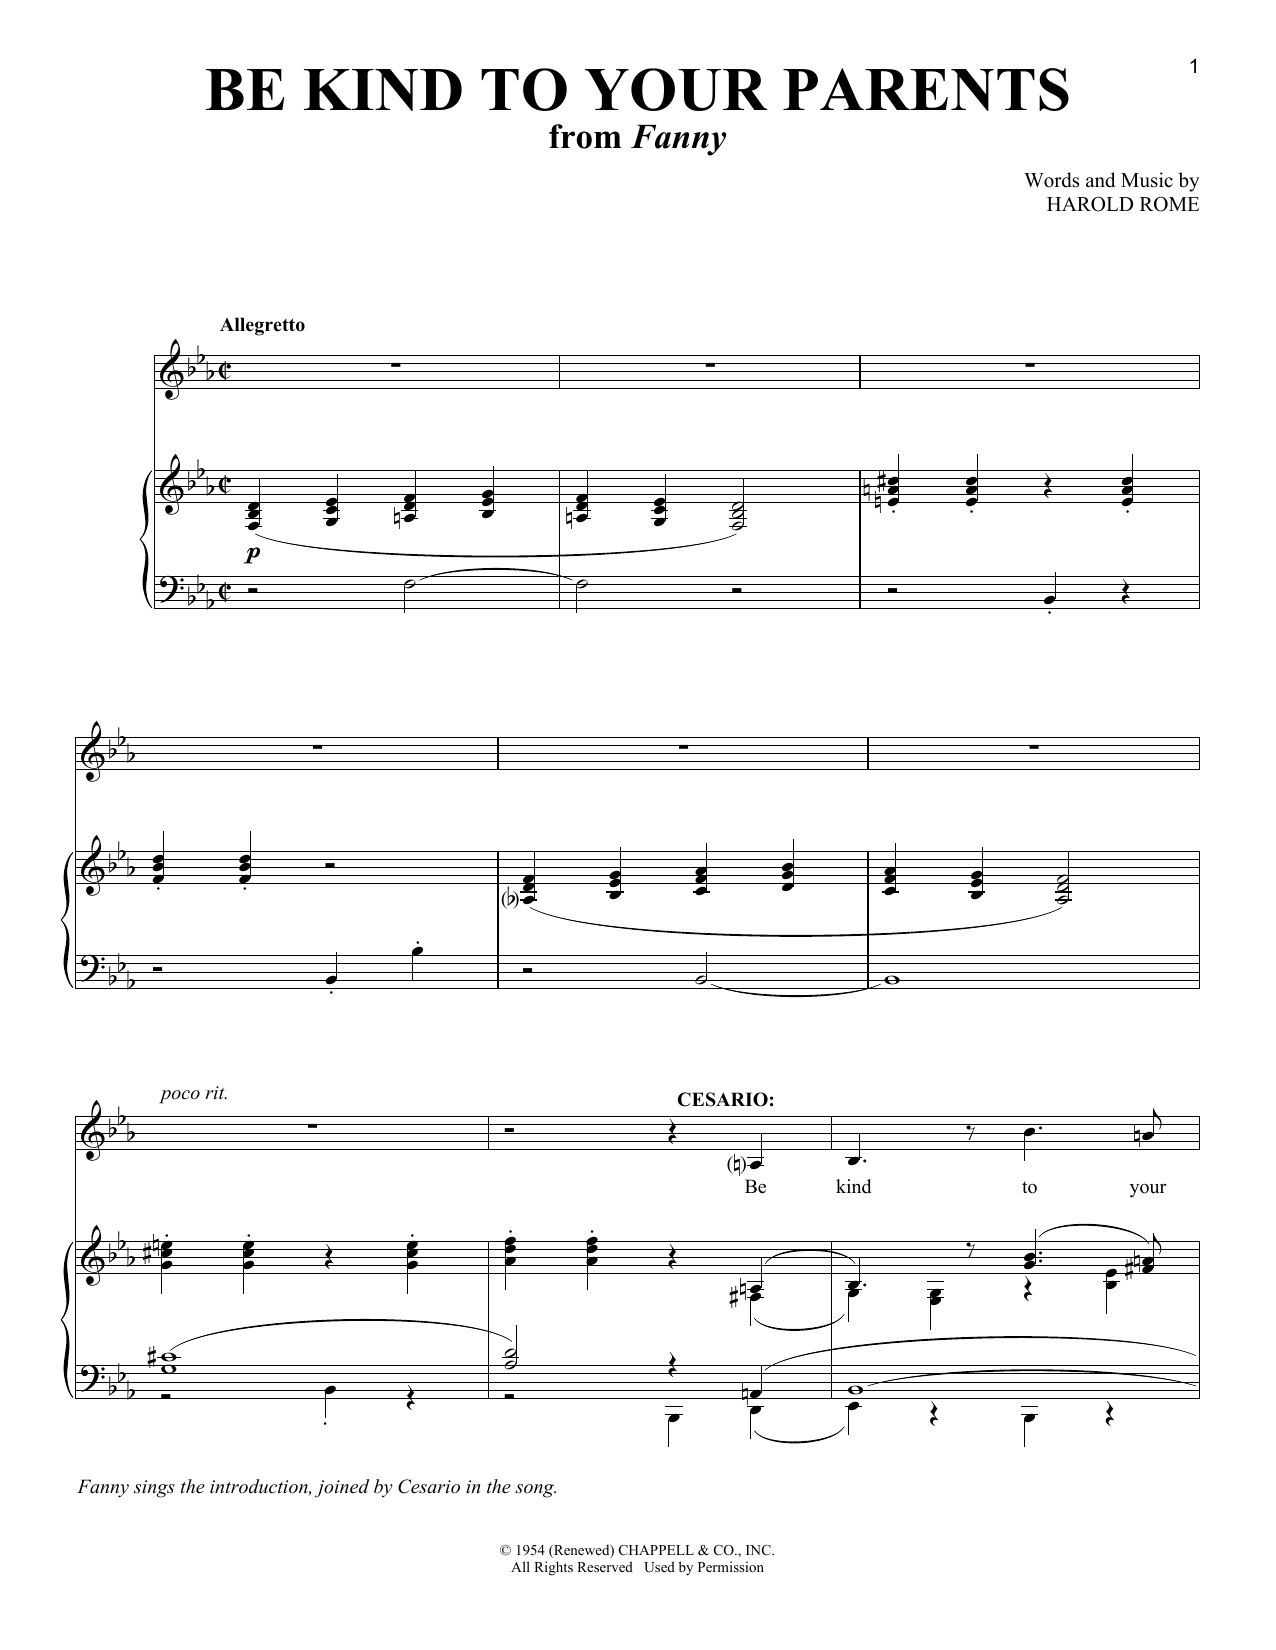 Download Harold Rome Be Kind To Your Parents Sheet Music